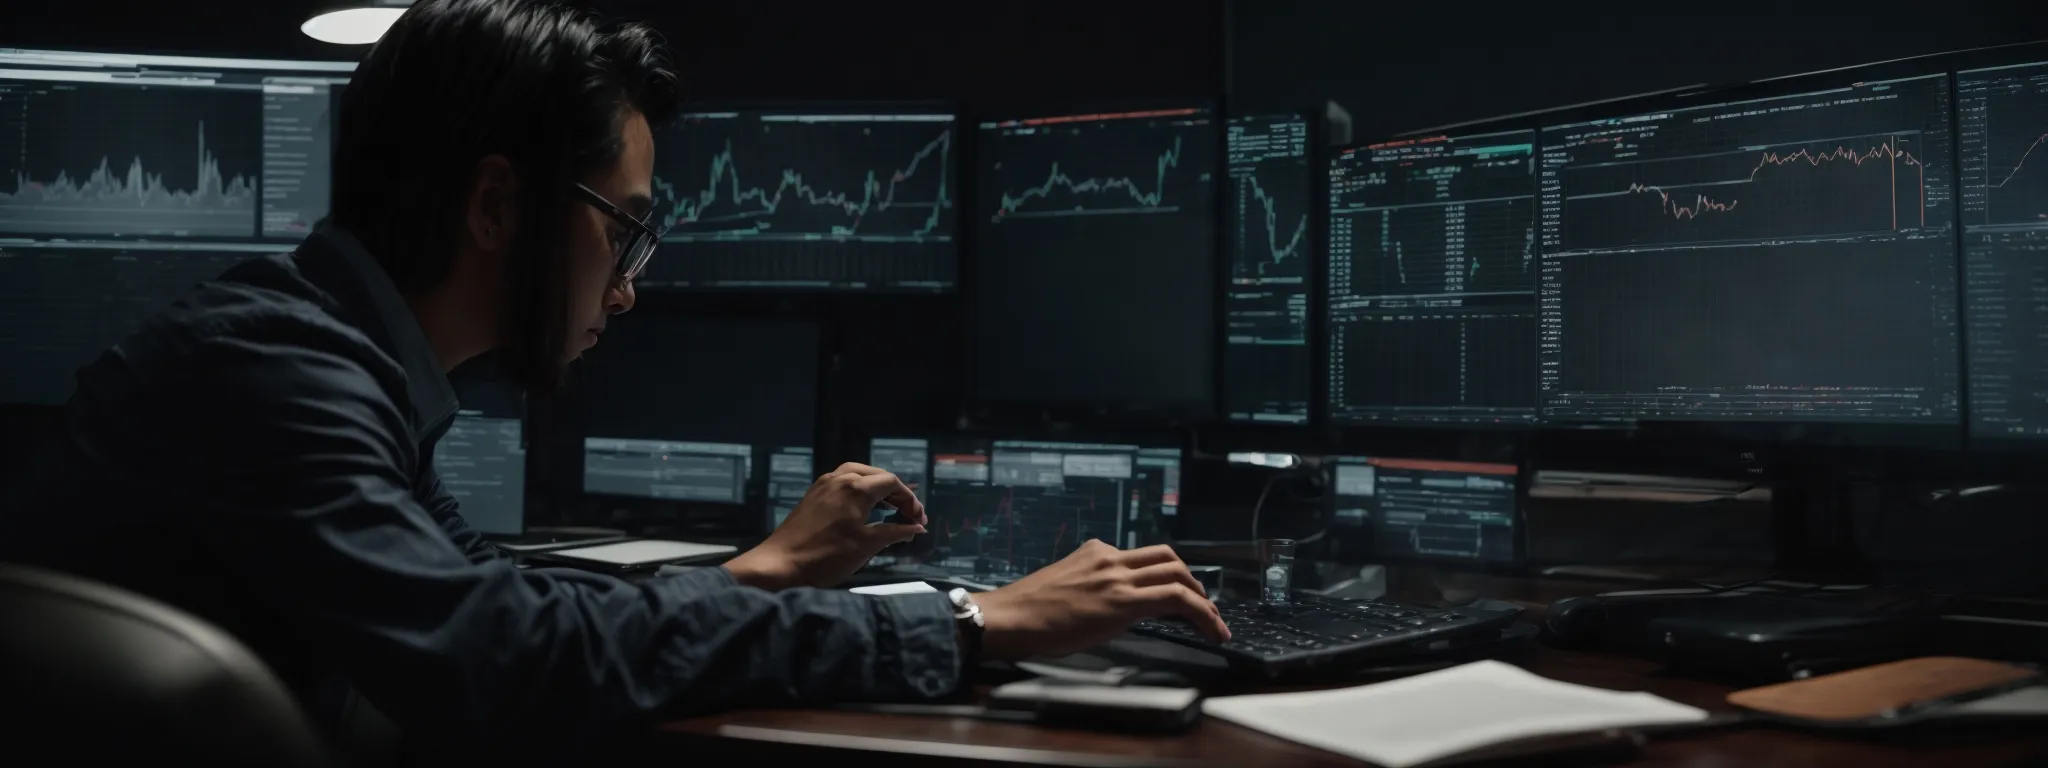 a person calmly analyzing graphs and charts on a computer screen, reflecting strategic digital marketing planning.